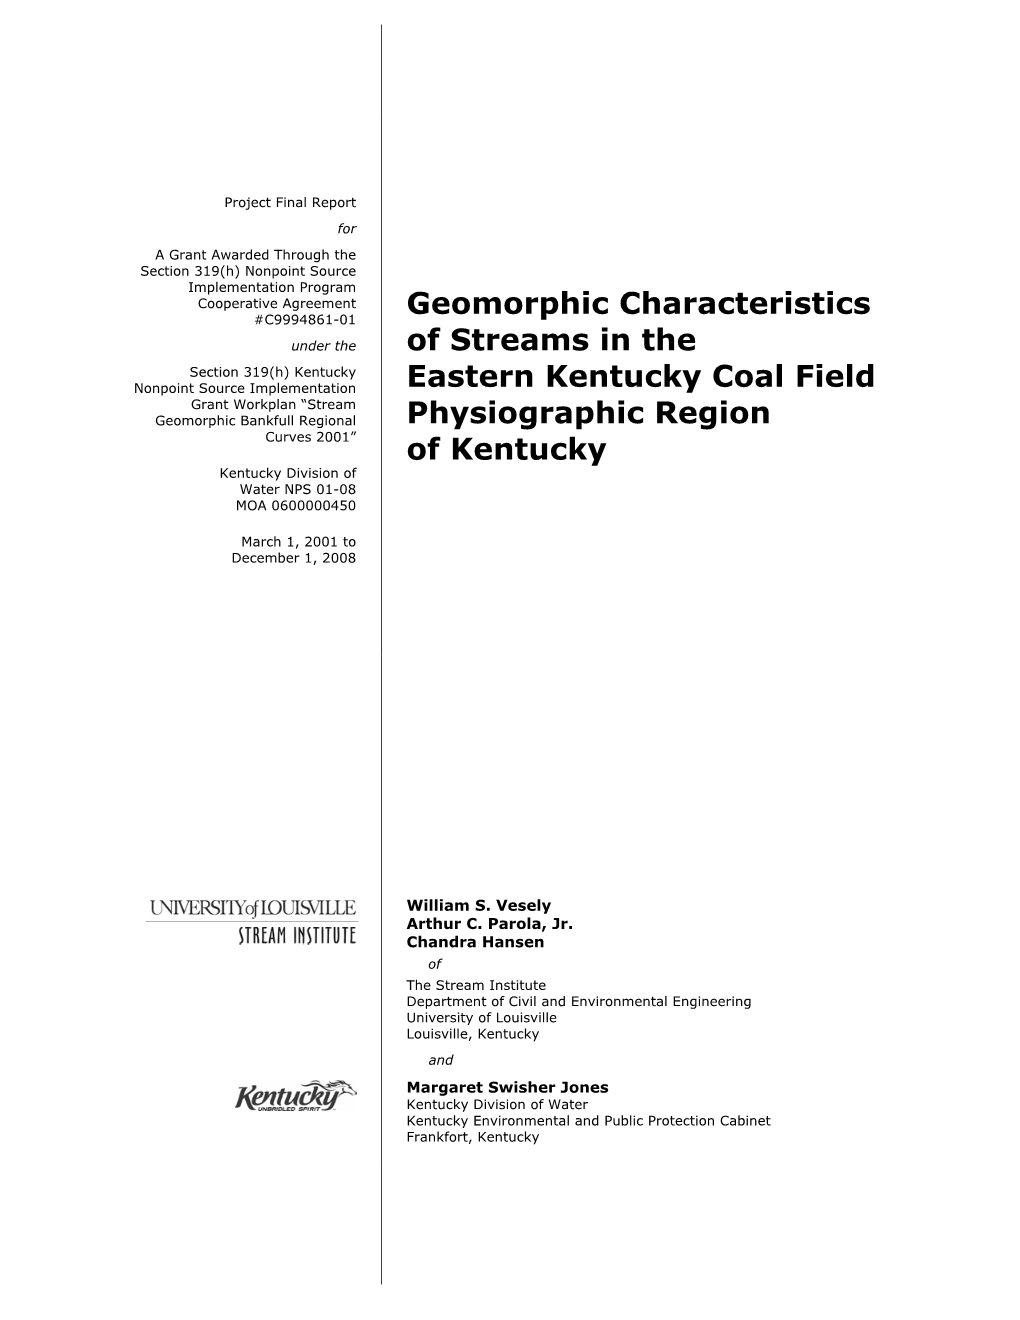 Geomorphic Characteristics of Streams in the Eastern Kentucky Coal Field Physiographic Region of Kentucky